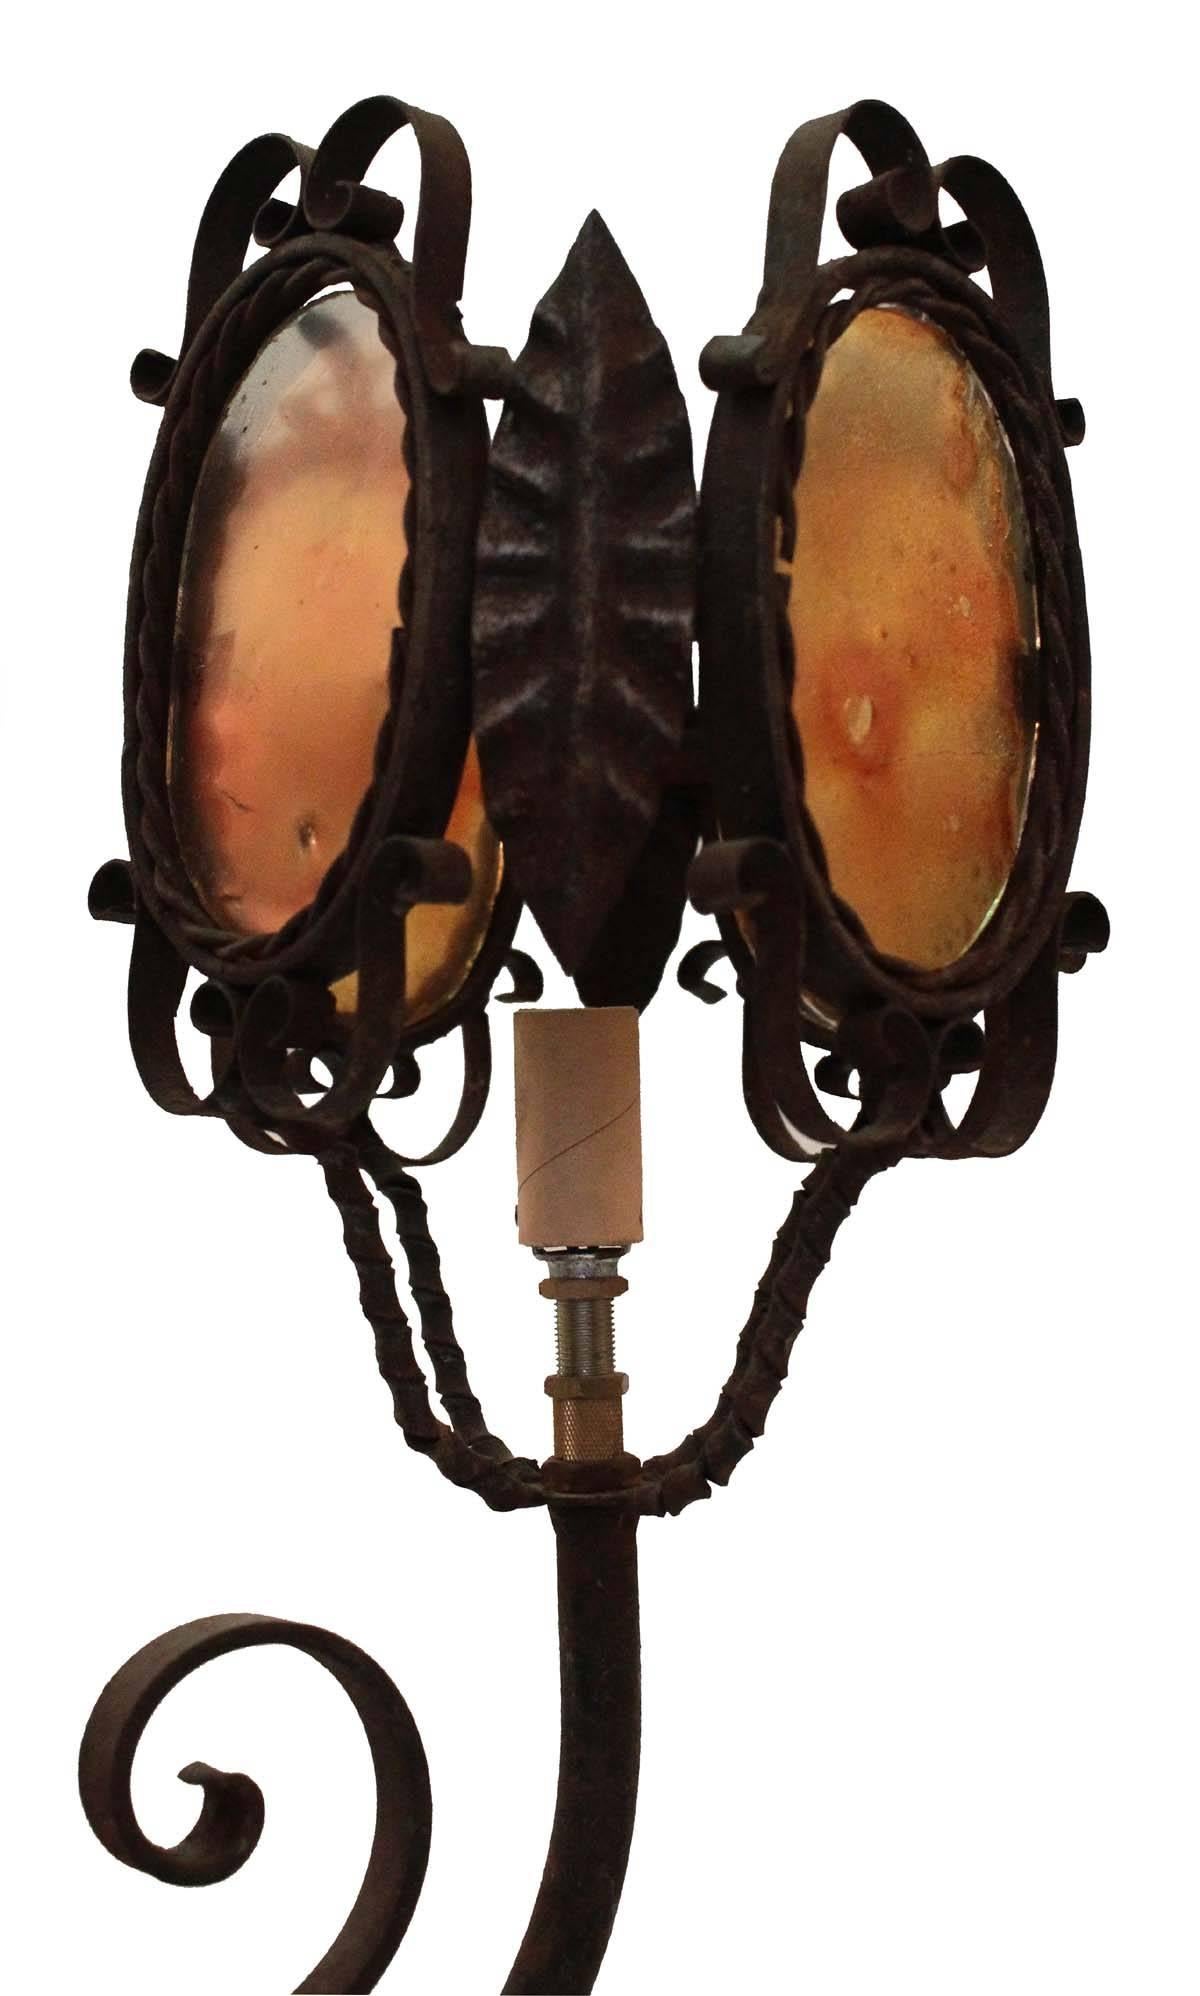 This fixture was converted from a Classic French gas chandelier into a fully functional electrified fixture. The glass is all original hand molded. Iron all handmade. This Chandelier is a beautiful handcrafted fixture.